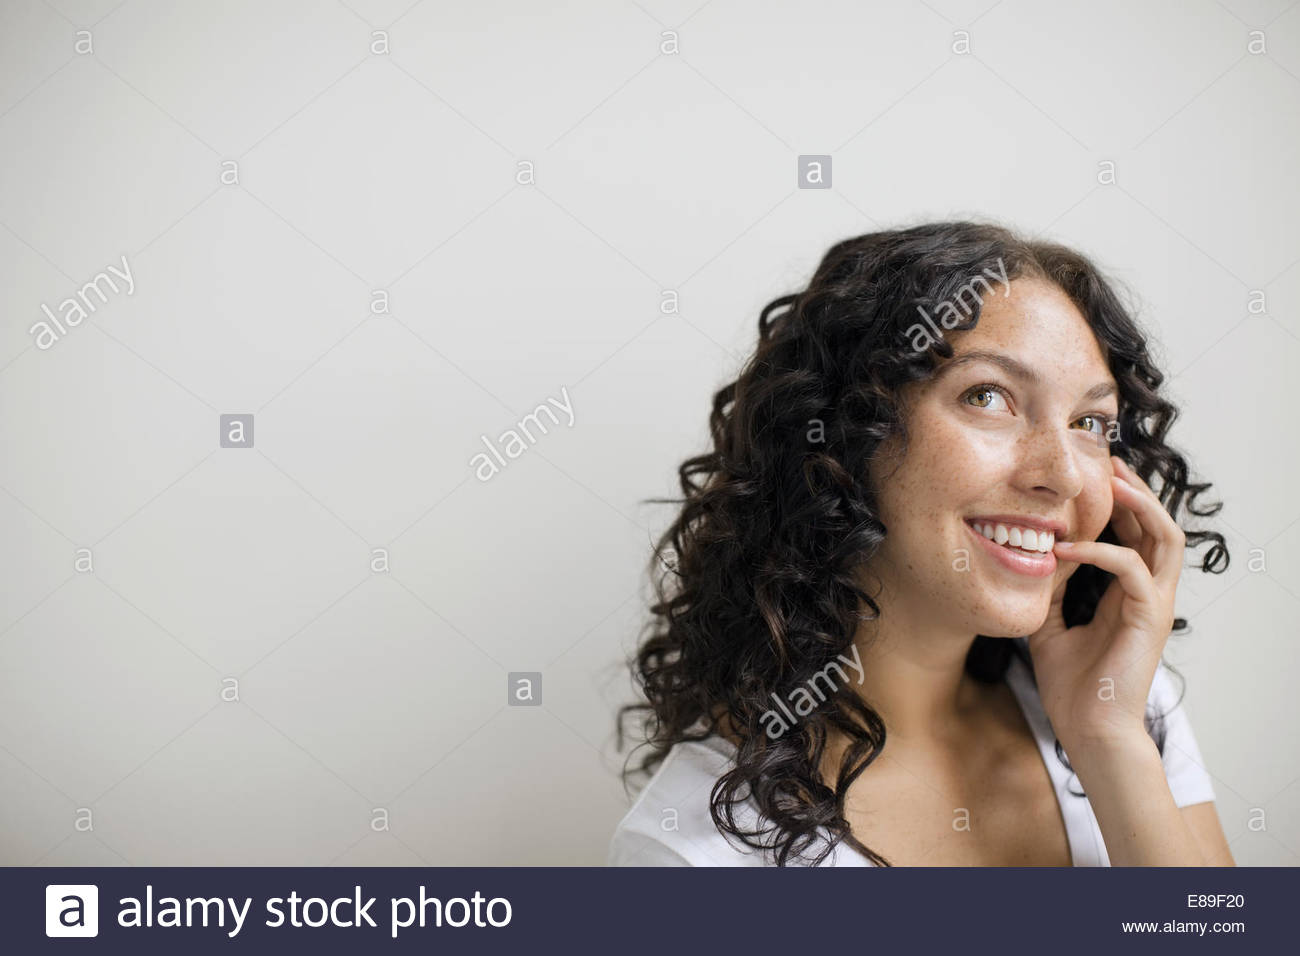 Curious woman with curly black hair Stock Photo